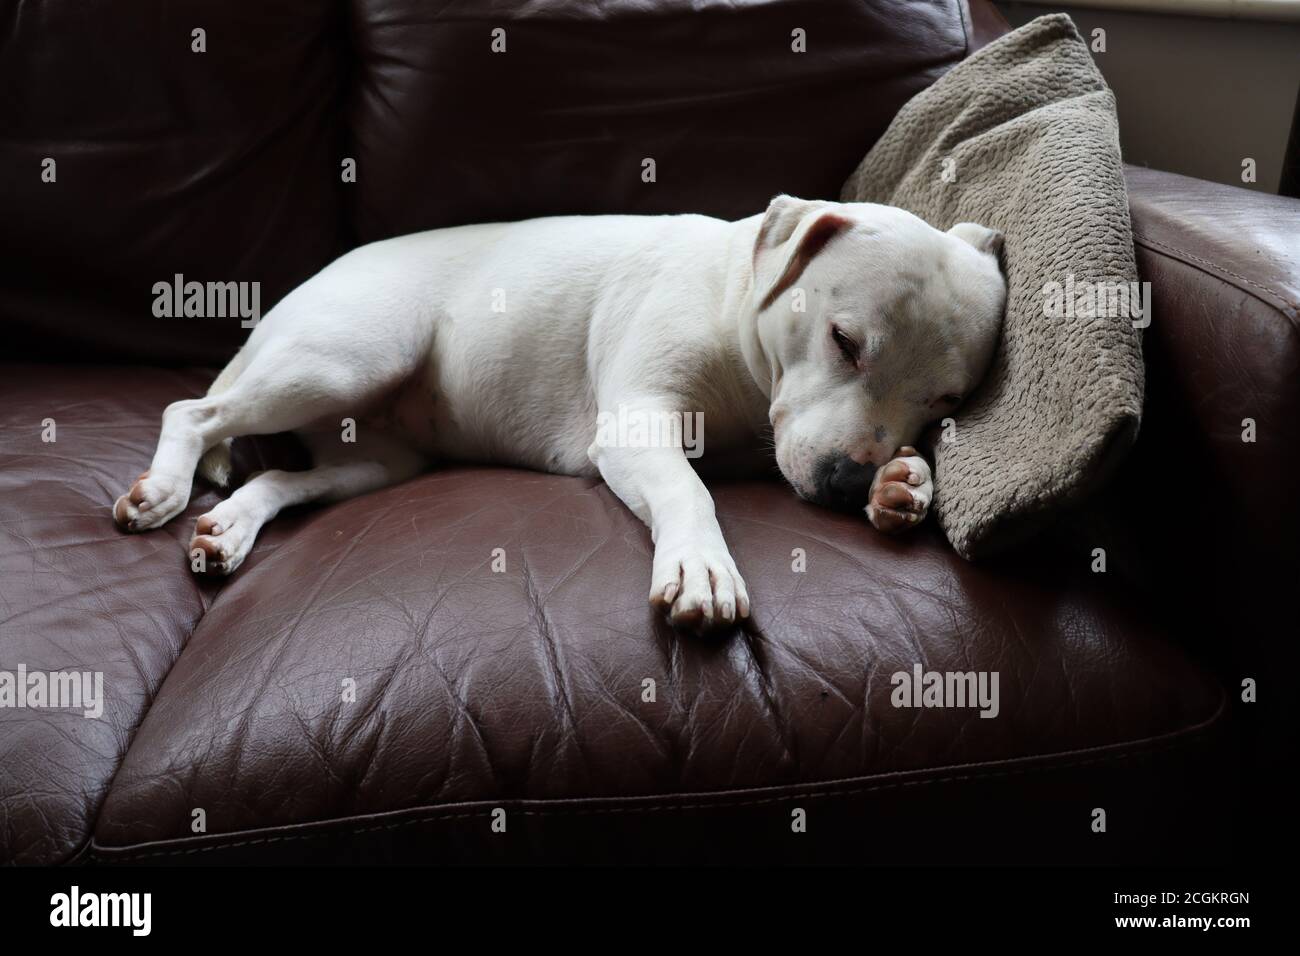 Cute white puppy dog sleeping on brown sofa with head on blanket. Stock Photo